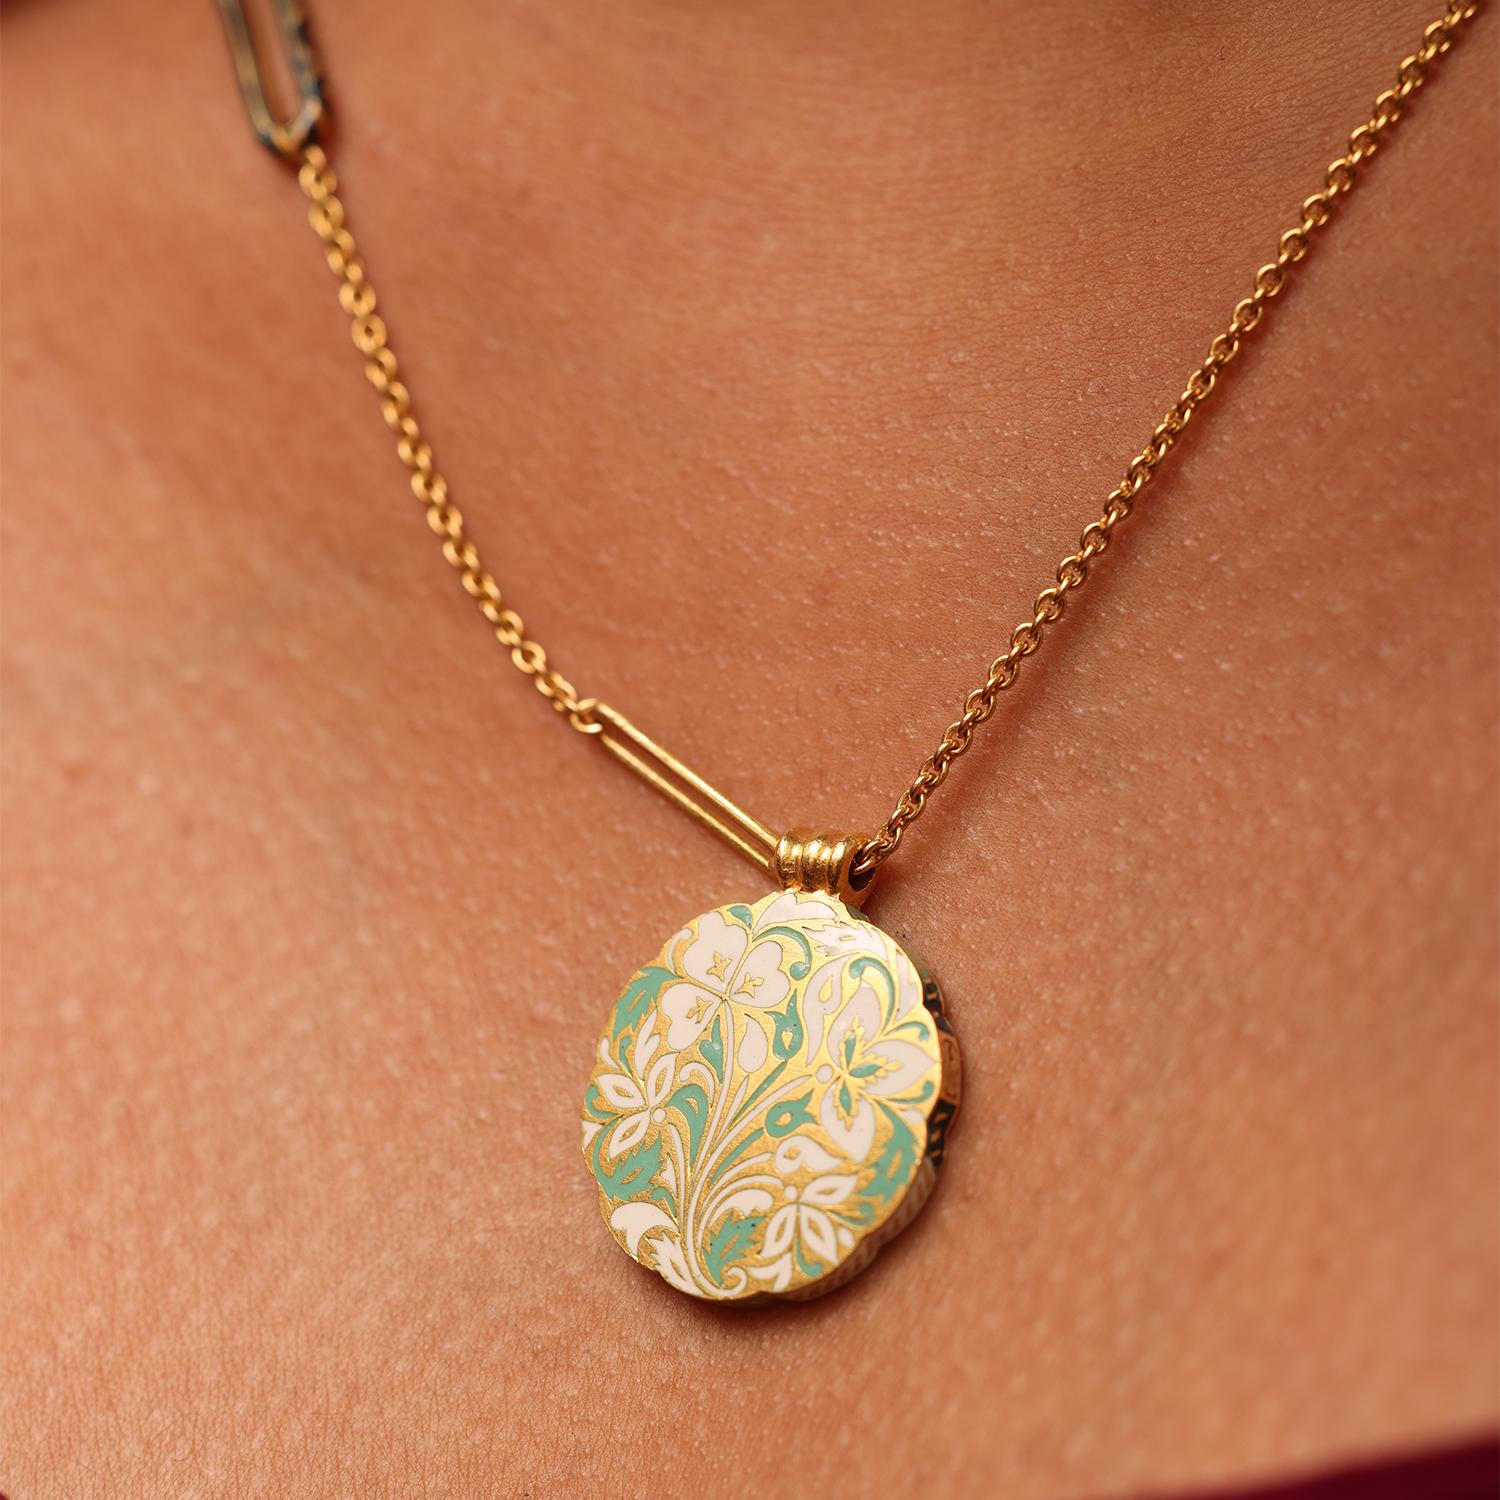 22K Gold and Blue and Green Floral Enamel Pendant Necklace Handmade by Agaro For Sale 2